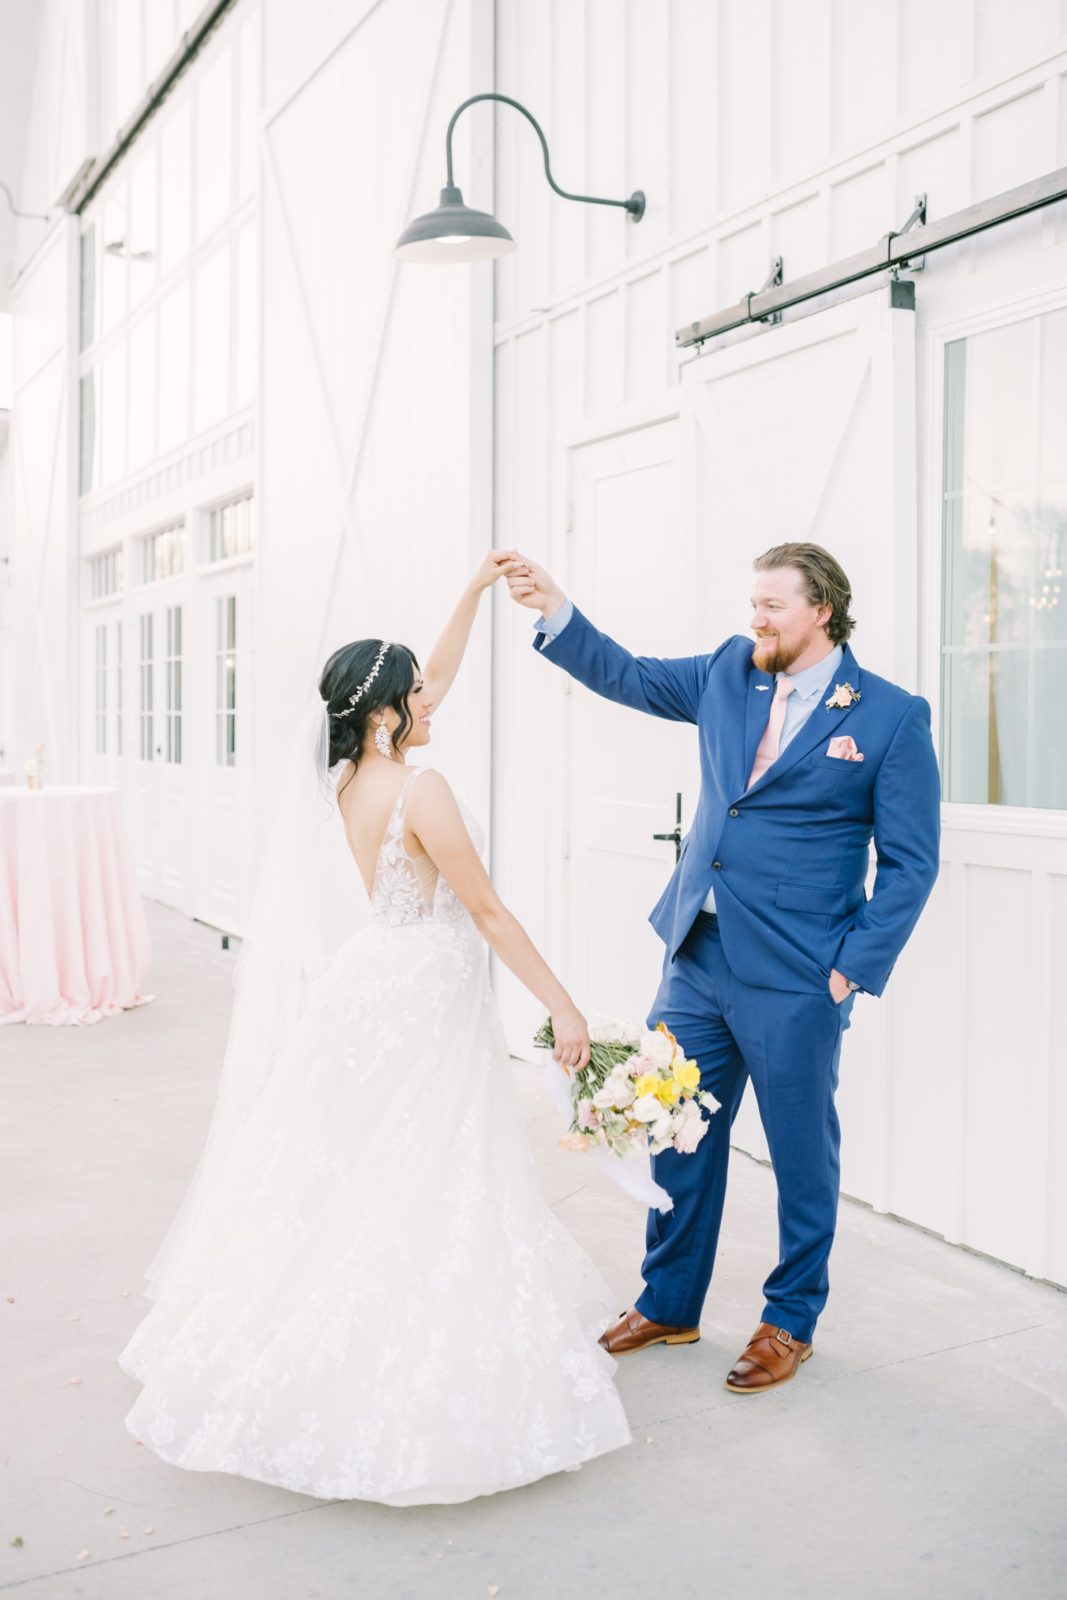 Christina Elliott Photography captures a newly married couple dancing outside a white barn. Texas weddings photographers in Houston #ChristinaElliottPhotography #ChristinaElliottWeddings #Houstonwedding #TheSpringsVenue #EastHoustonweddings